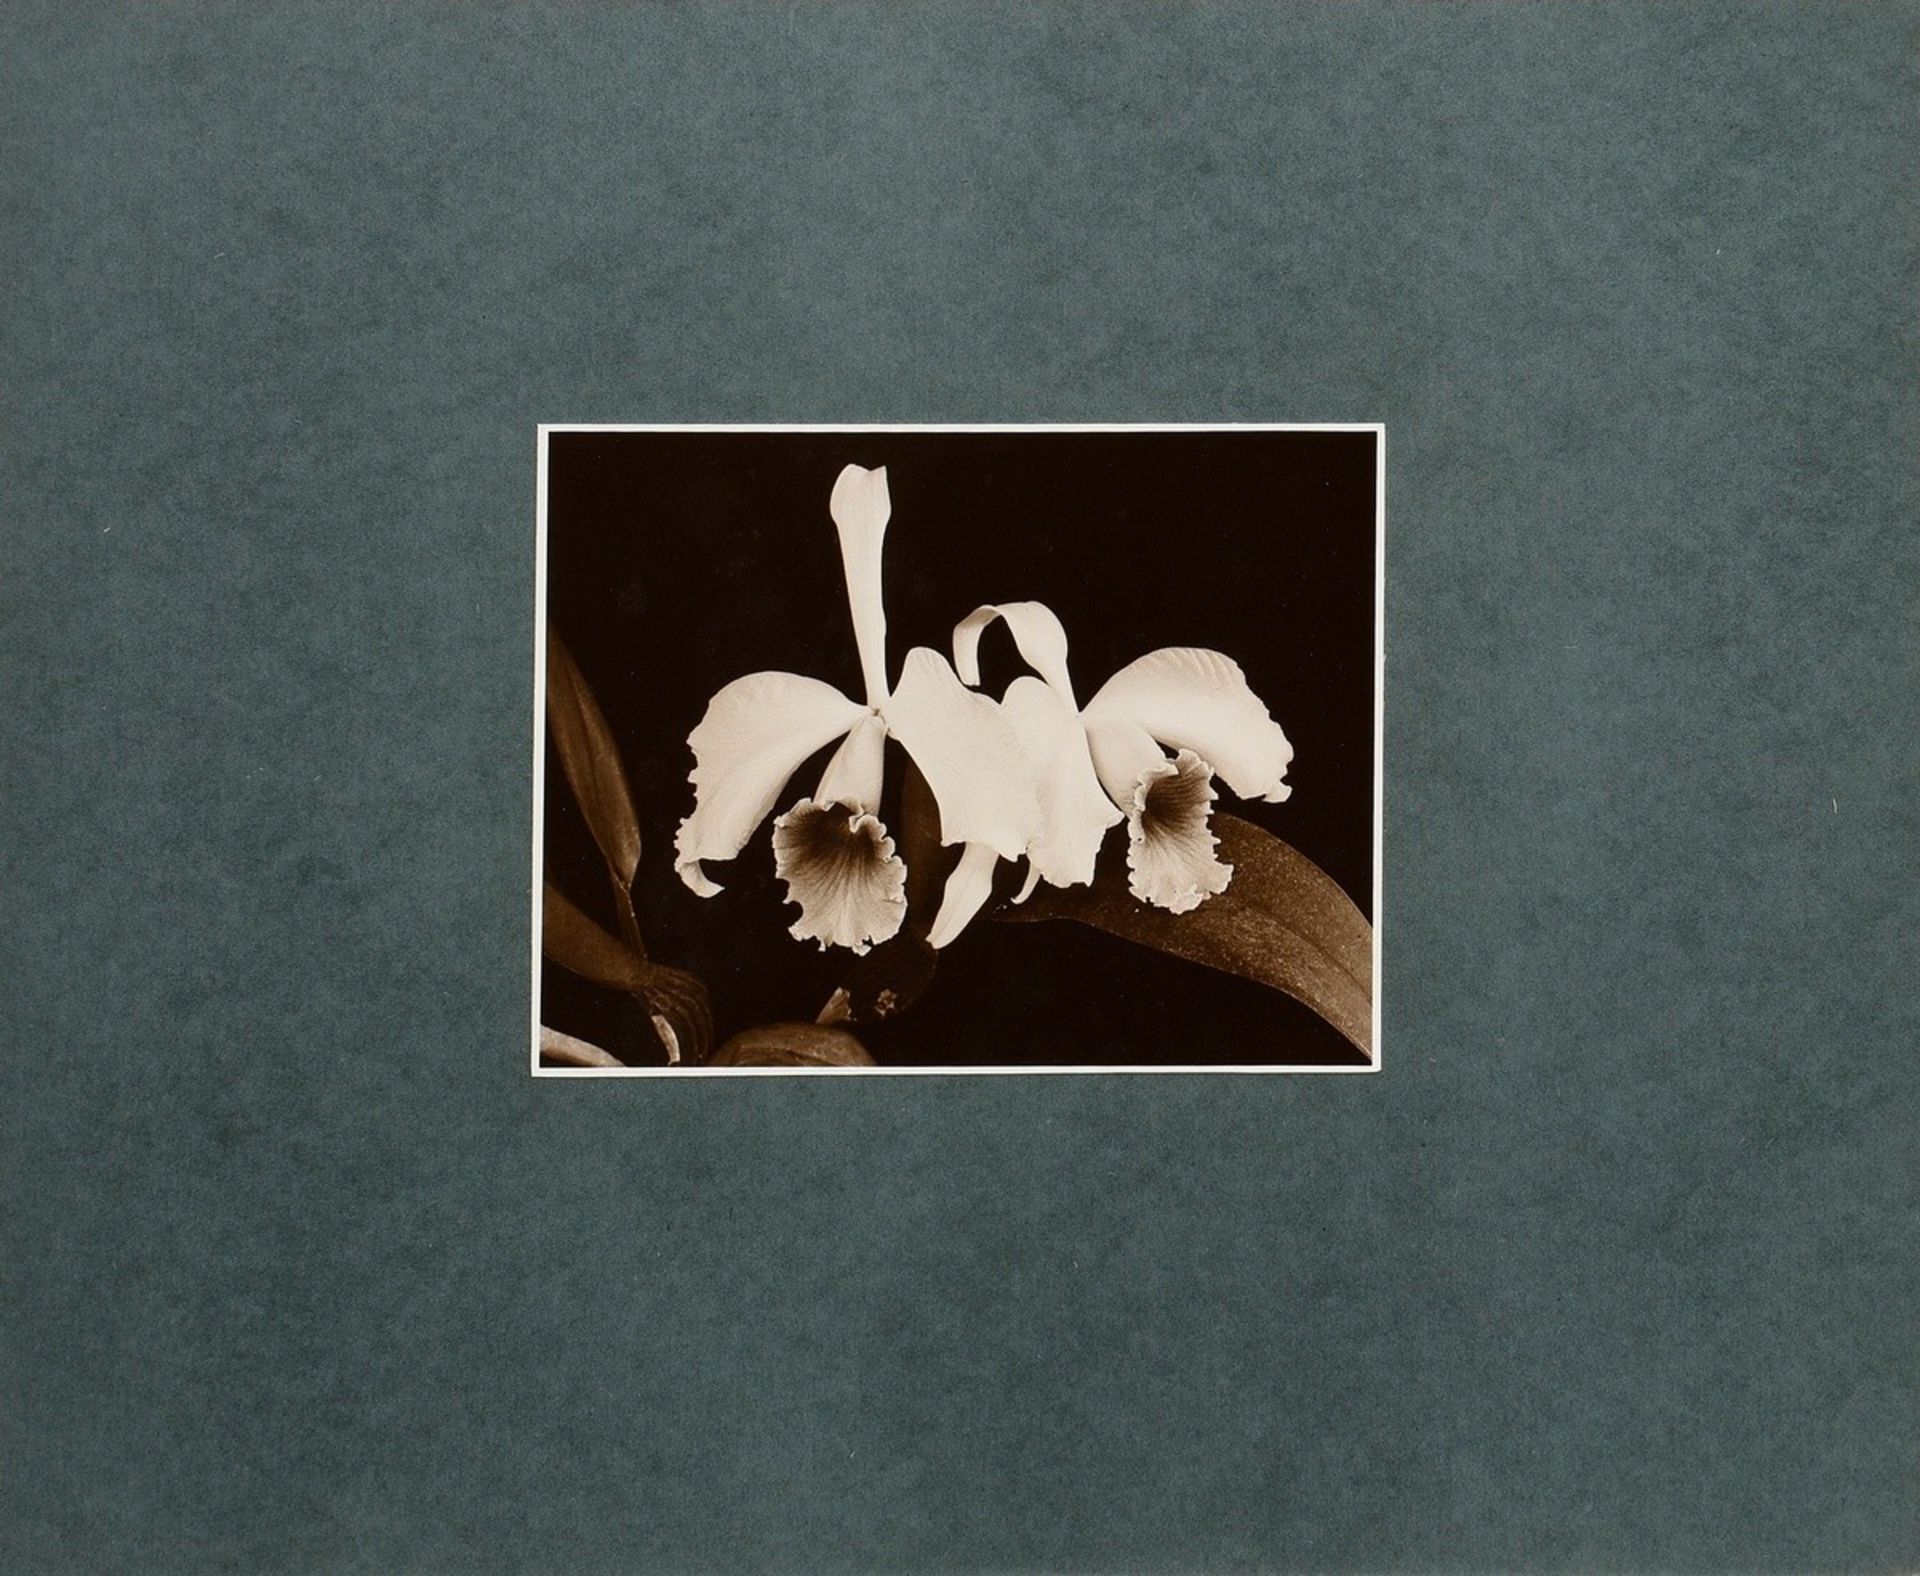 6 Koch, Fred (1904-1947) "Ice Crystals, Mushrooms, Animals", photographs mounted on cardboard, insc - Image 8 of 20